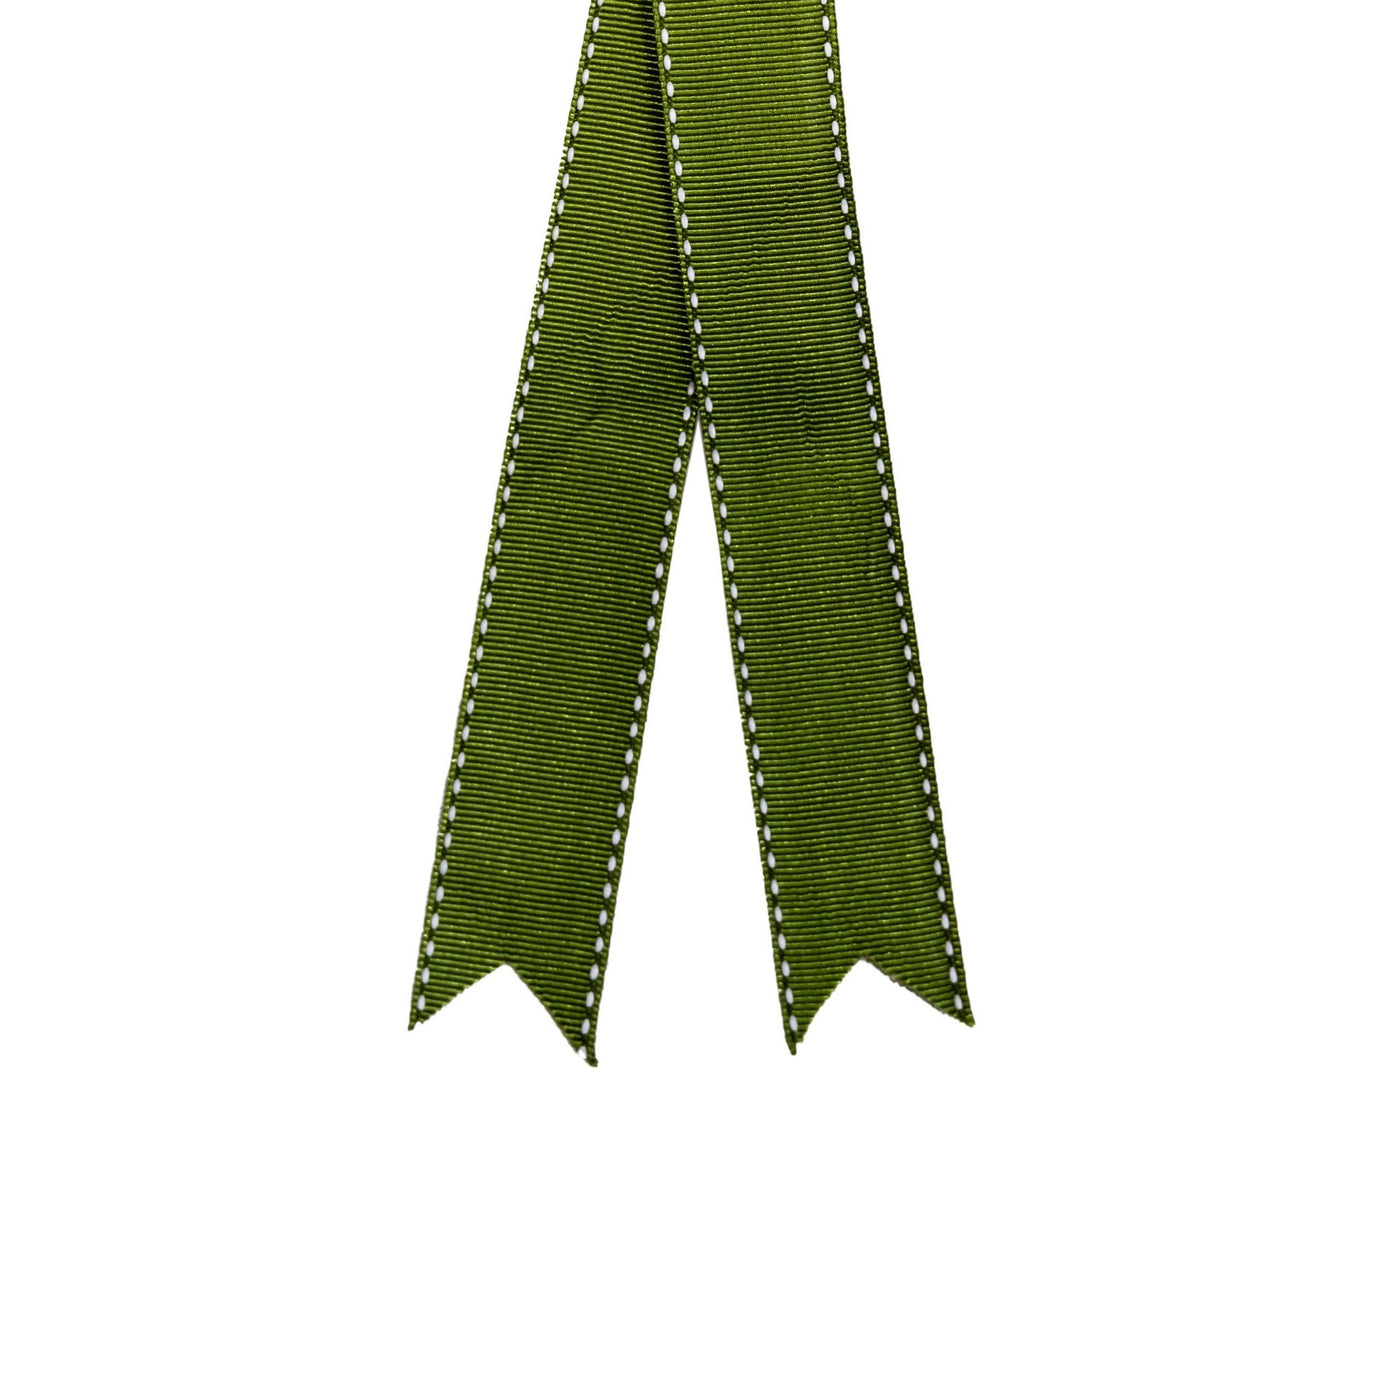 All Wreath Ribbons (Stockist)